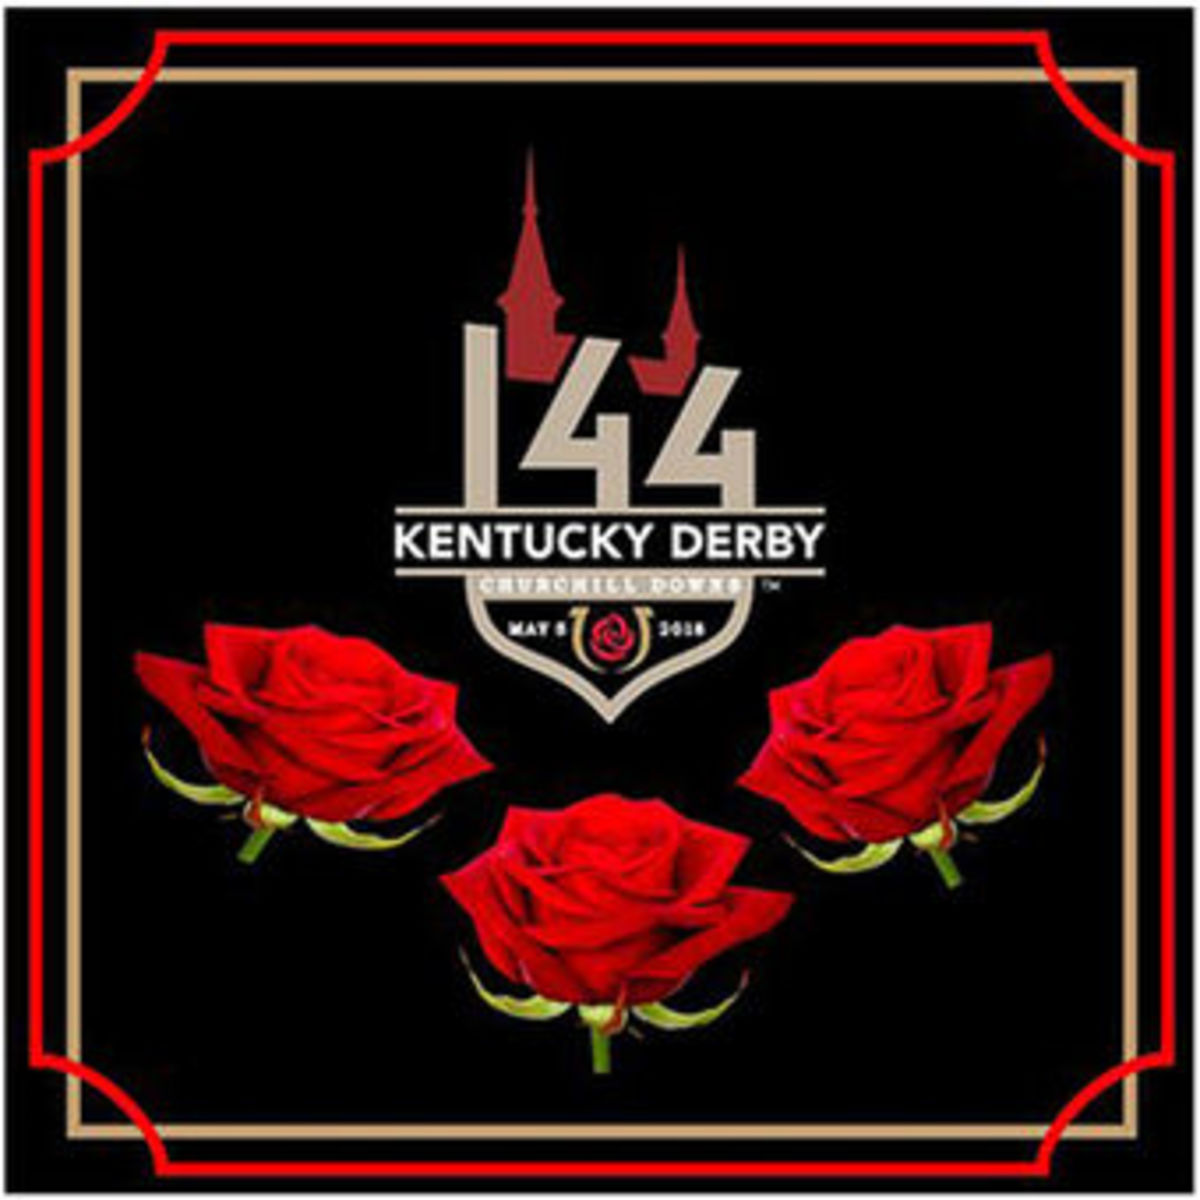 Every year, a new logo is chosen for the Kentucky Derby. Pictured above is the design for Derby #144.